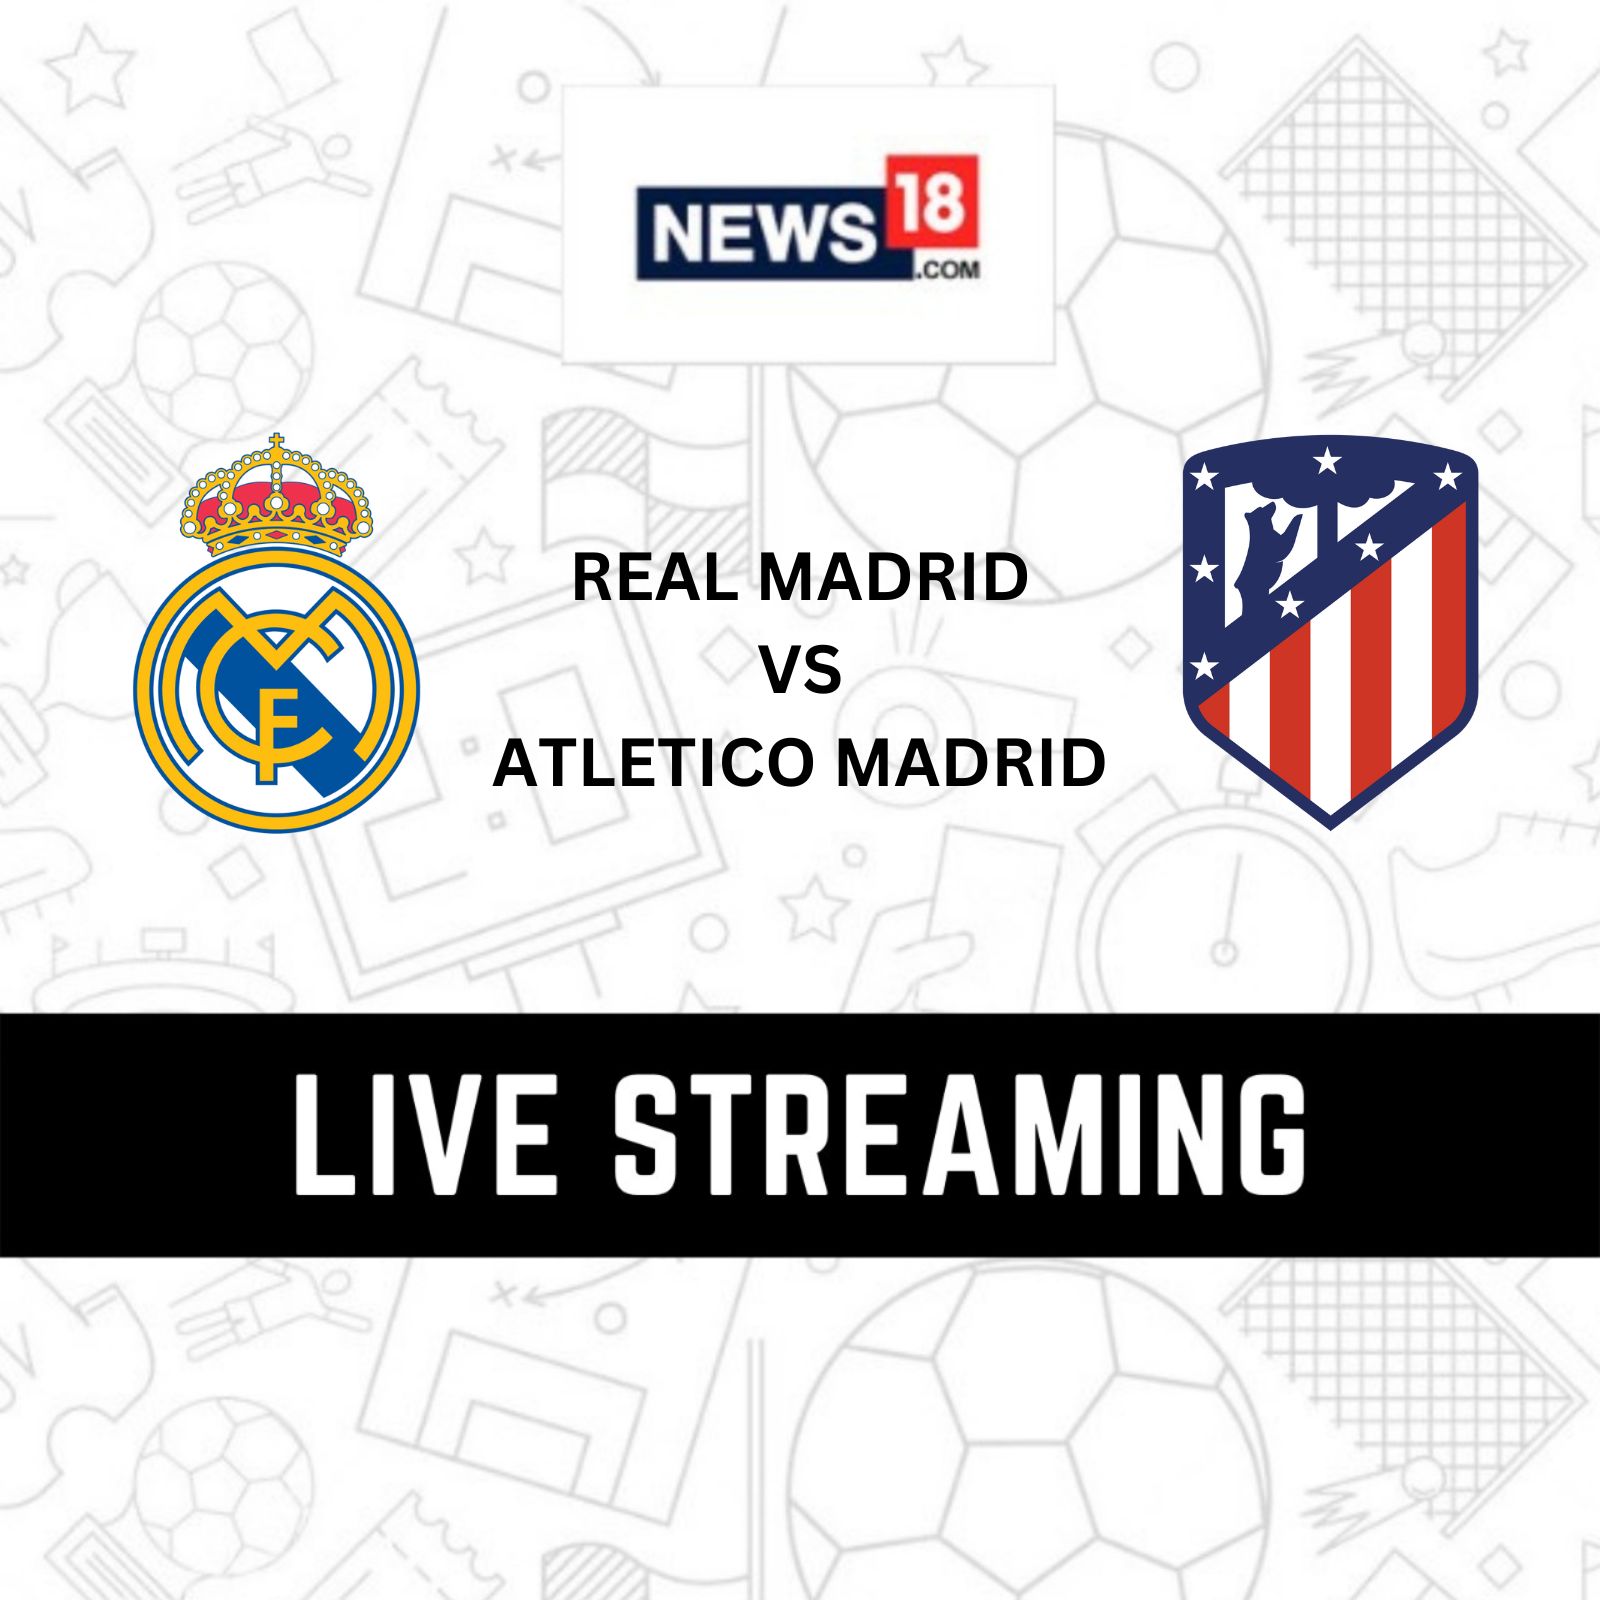 Real Madrid vs Club America, pre-season 2022-23 friendly: Get telecast and  watch live streaming in India